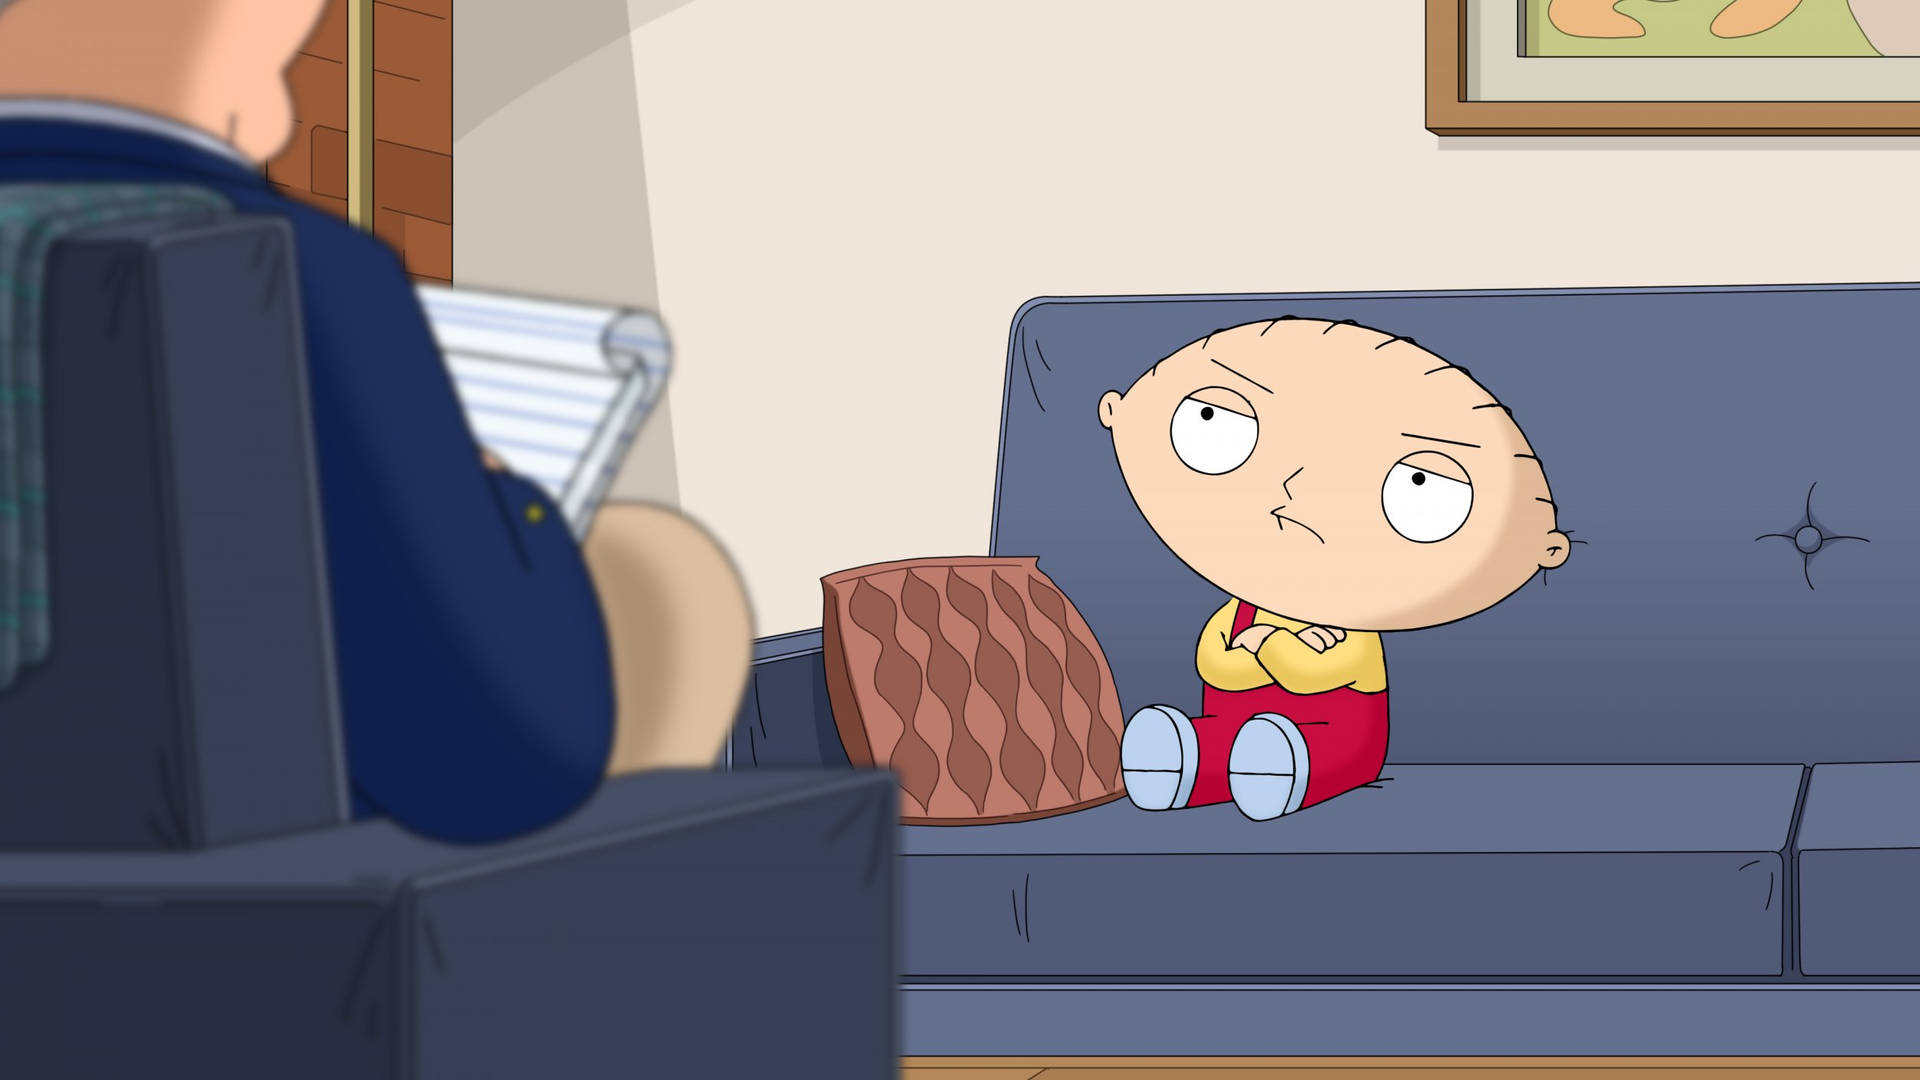 Stewie Griffin Crossed Arms Wallpaper